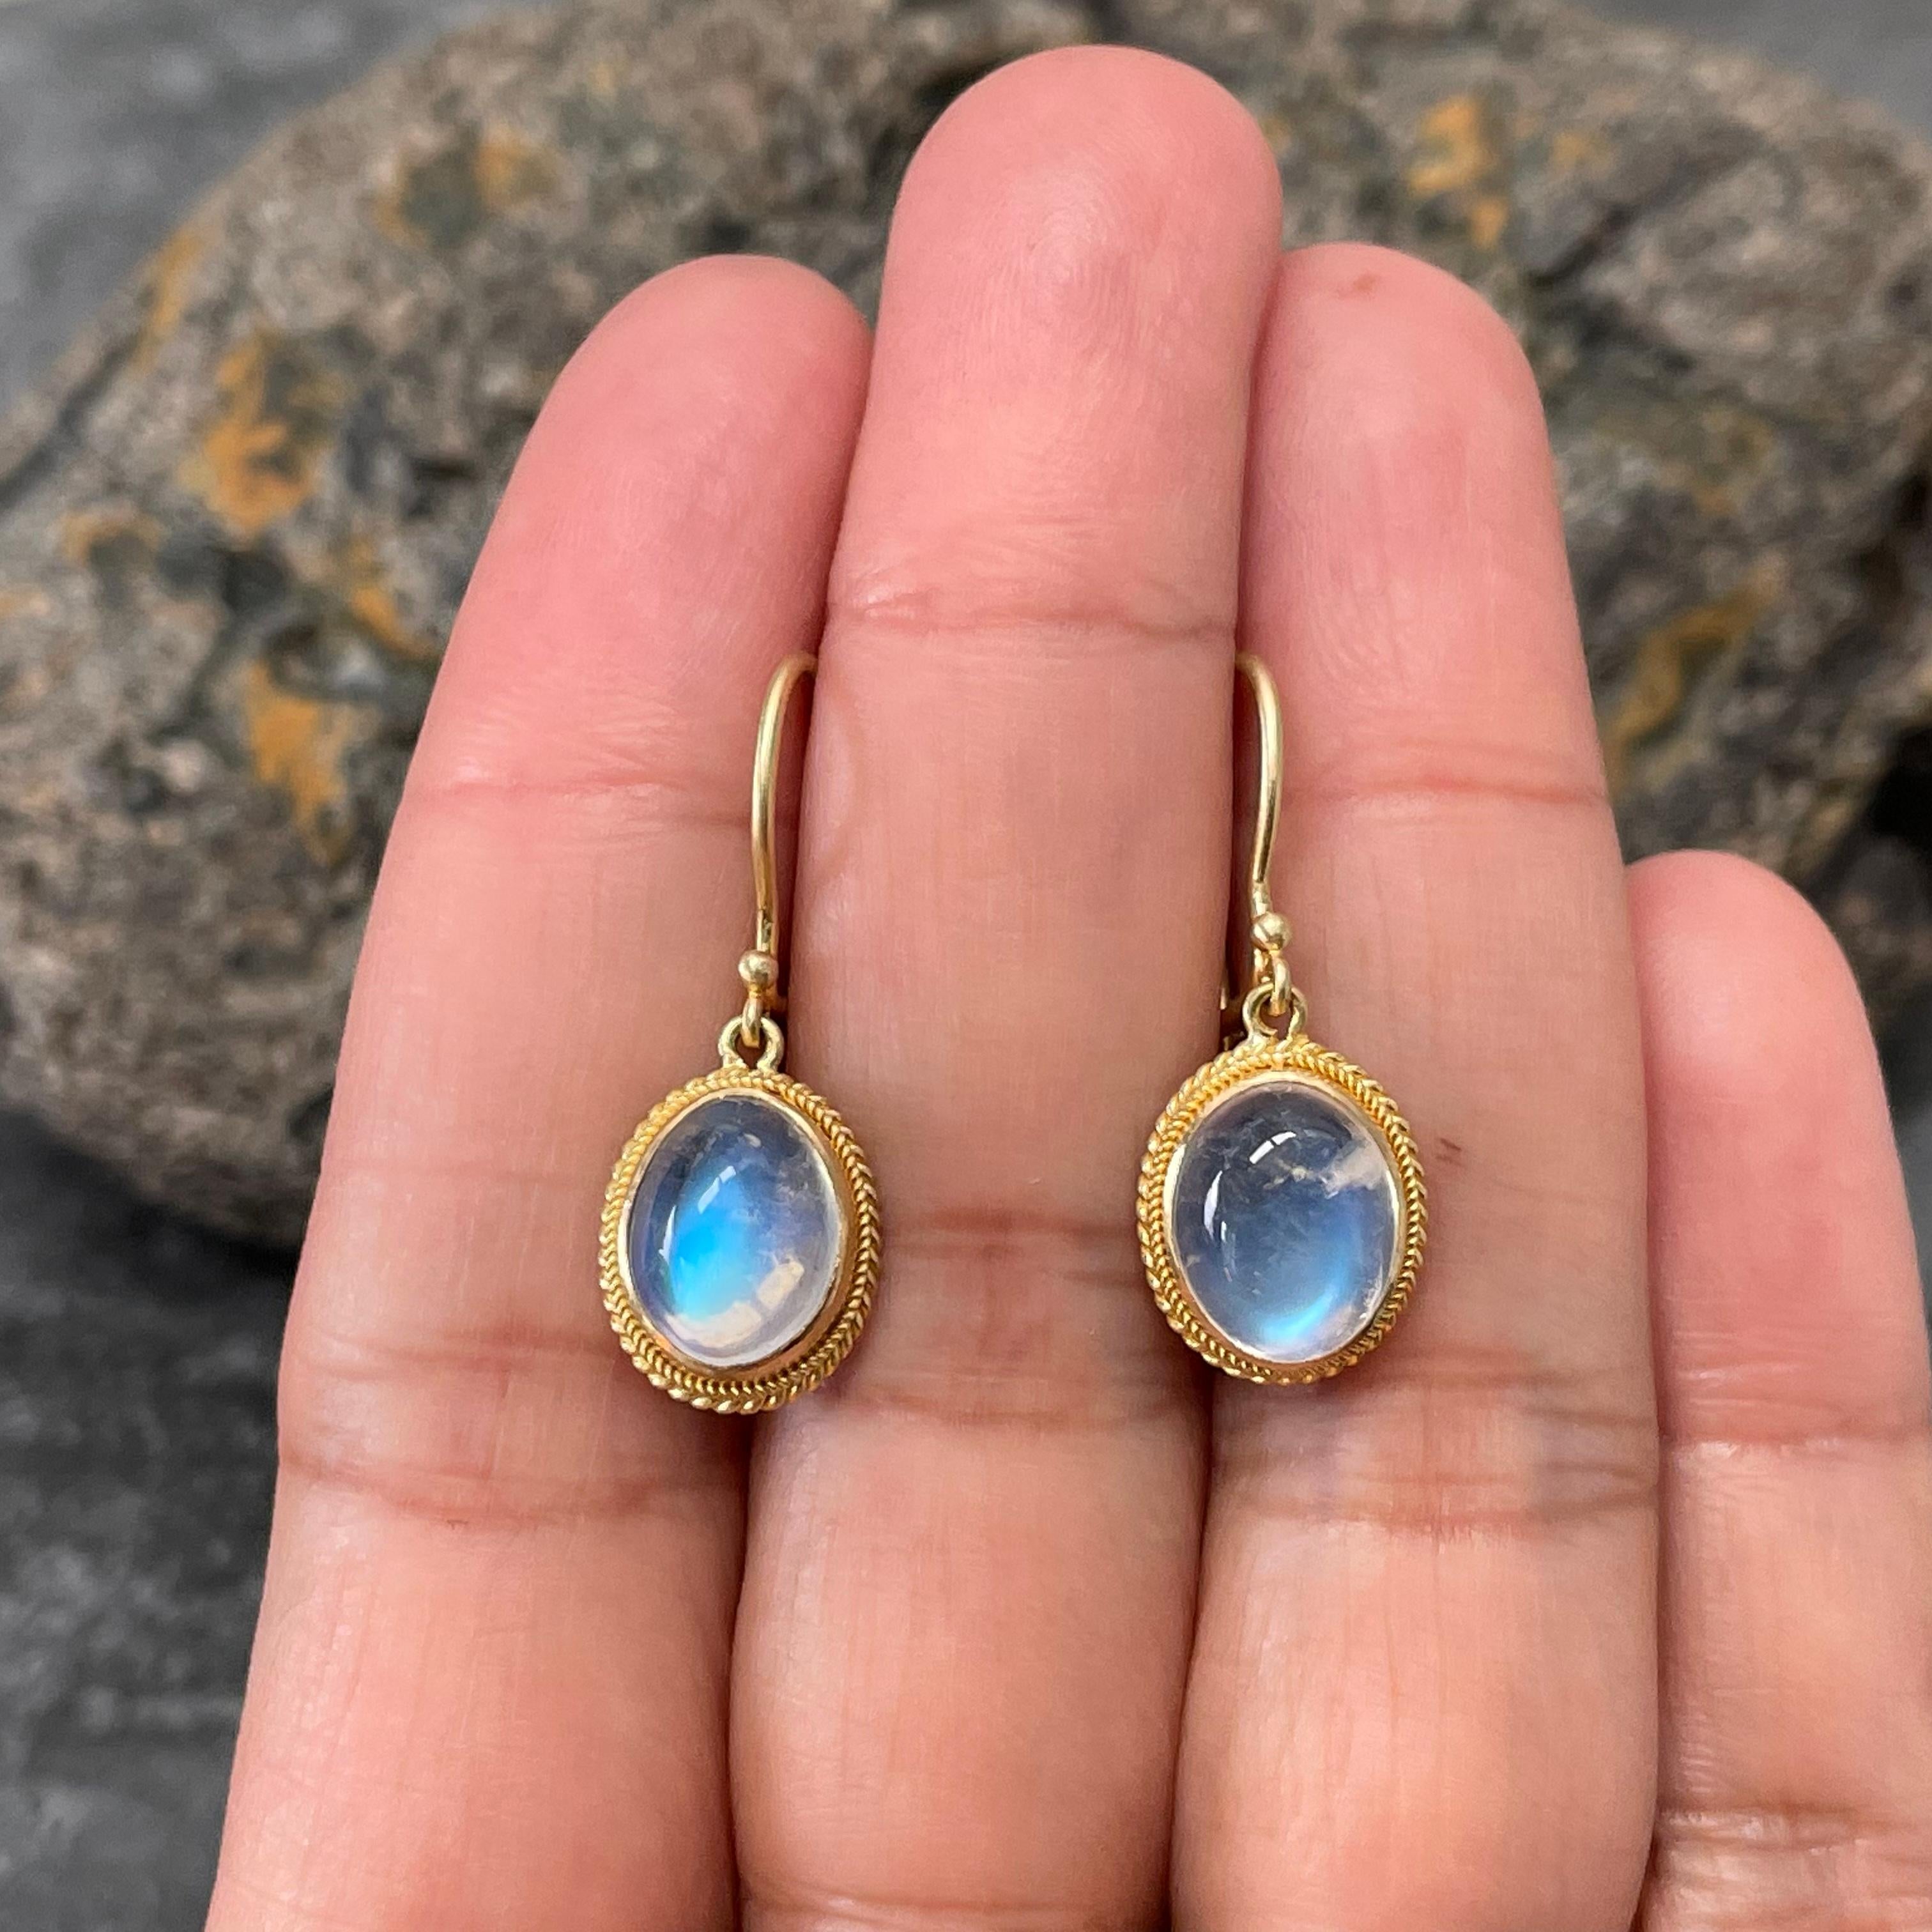 Two glowing blue 8 x 10 mm oval rainbow moonstone cabochons are held in double twist wire handmade bezels in this simple yet classic design. Safety clasp wires. These stones are clean and lively.  Nice !